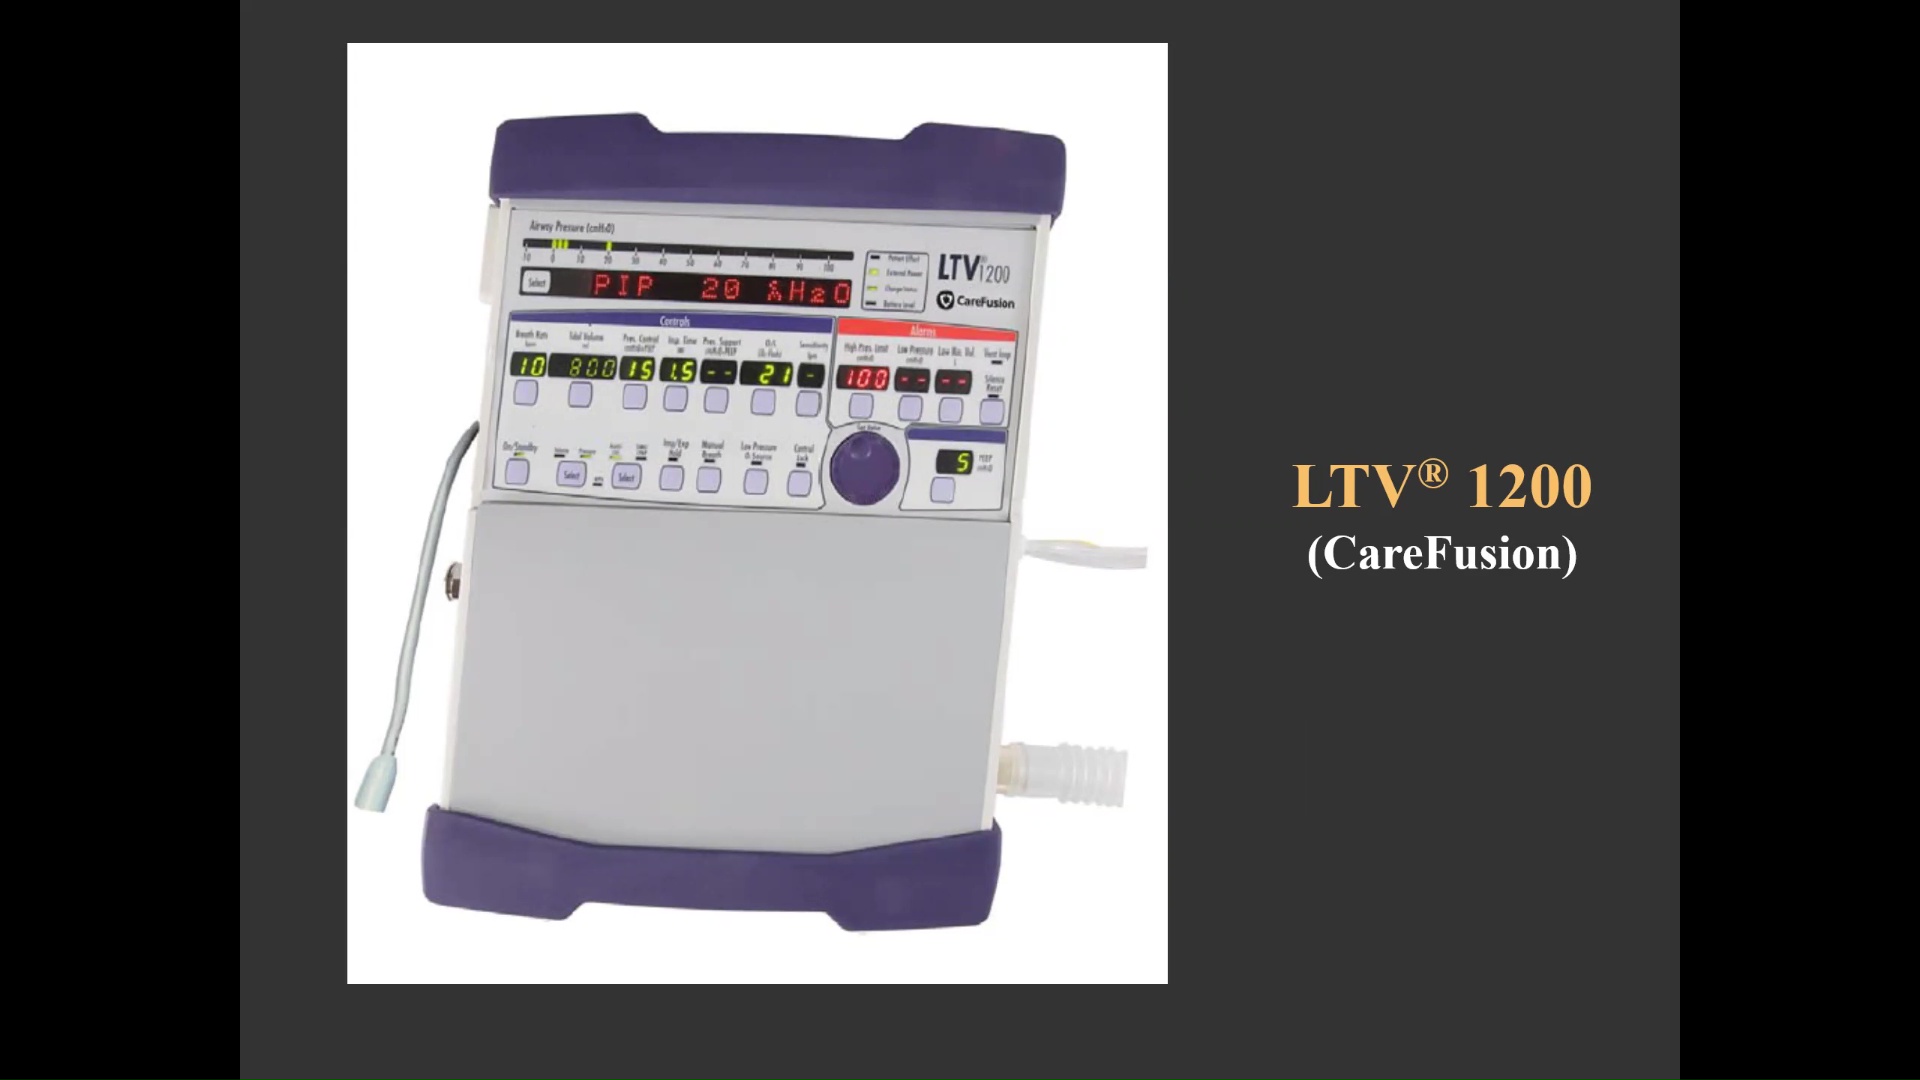 Use of the LTV 1200 Ventilator During the COVID-19 Pandemic